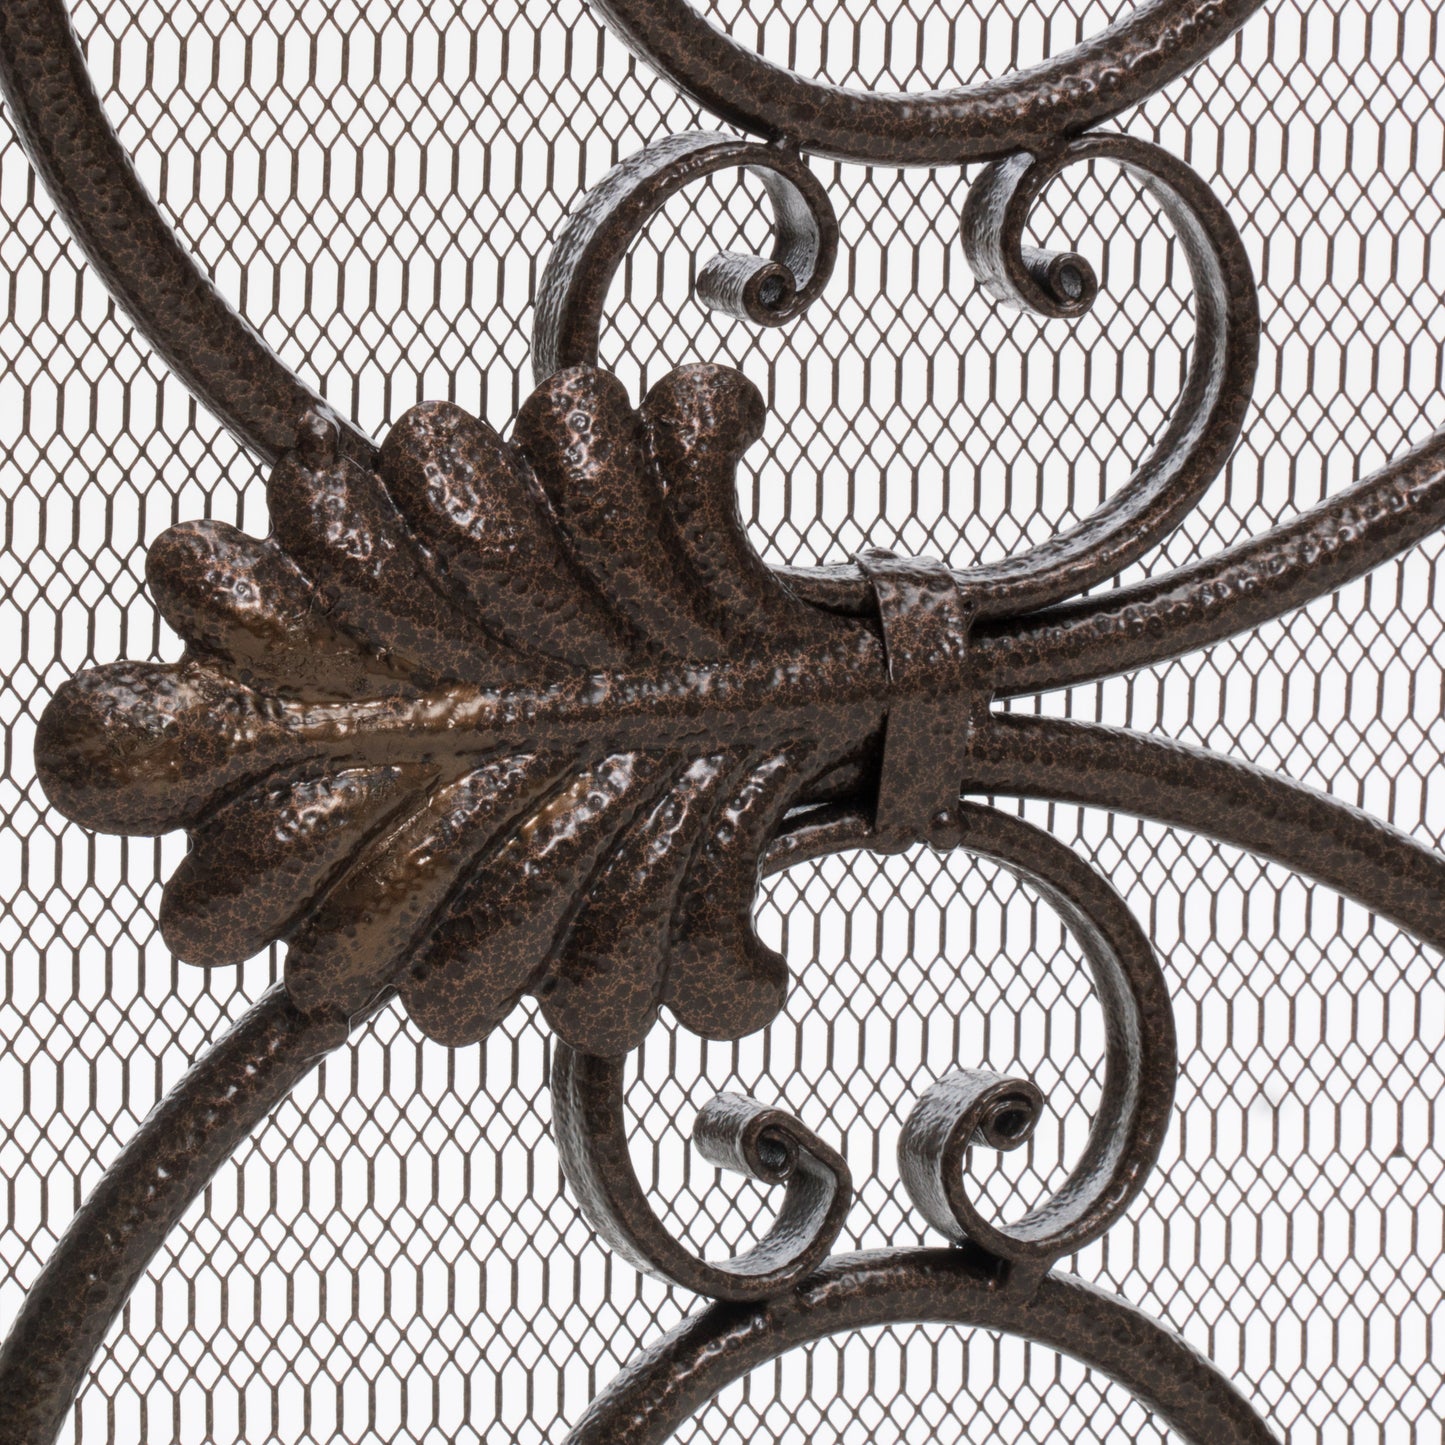 Darcie Copper Brown Finish Wrought Iron Fireplace Screen